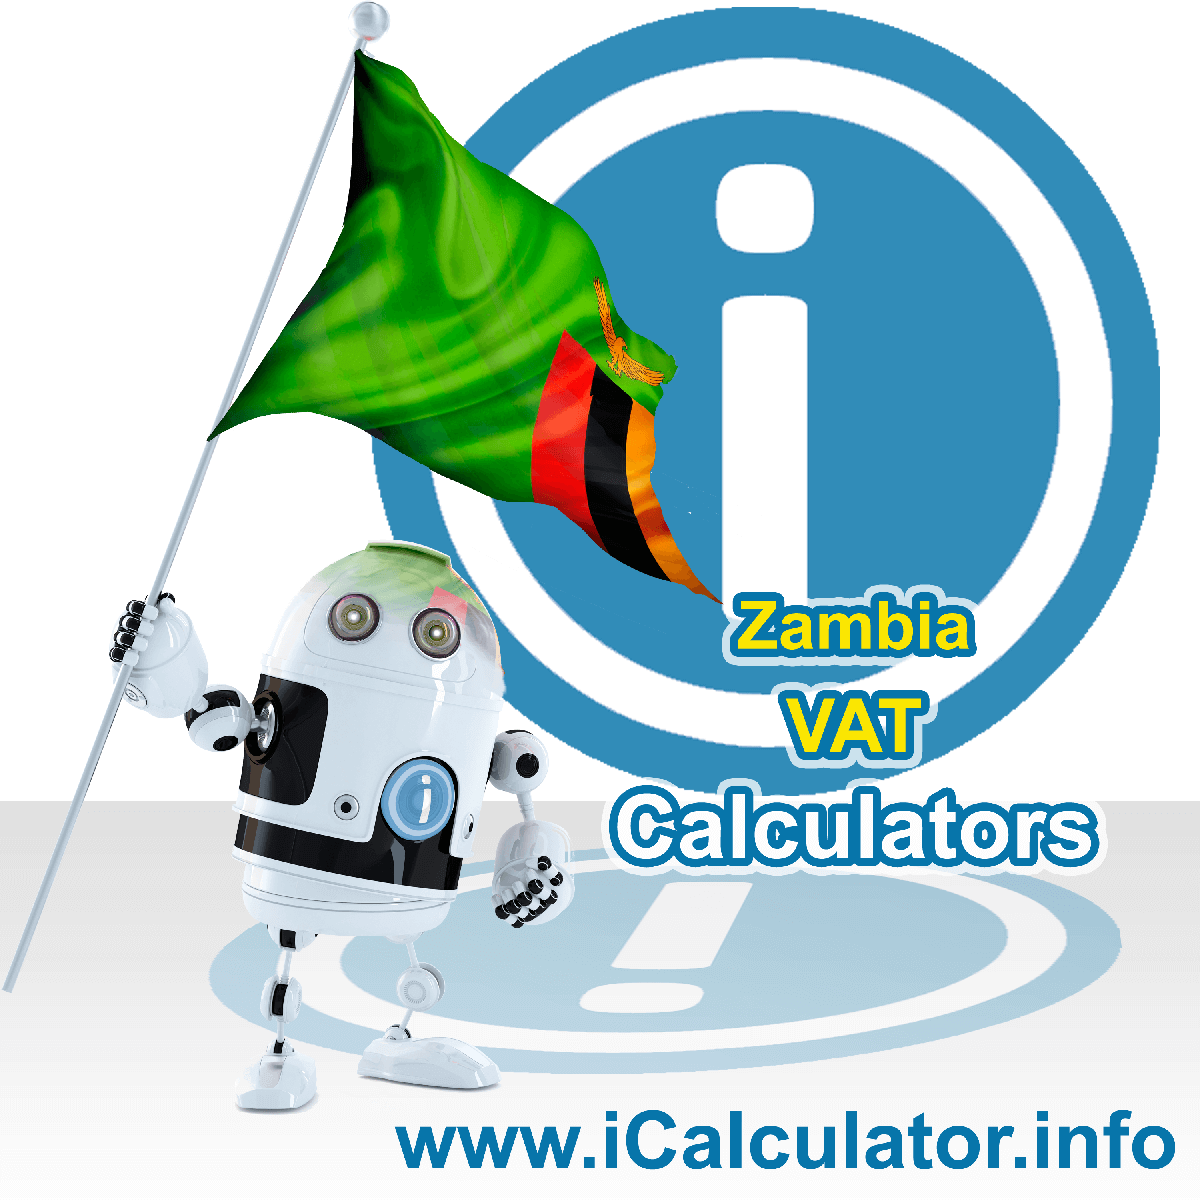 Zambia VAT Calculator. This image shows the Zambia flag and information relating to the VAT formula used for calculating Value Added Tax in Zambia using the Zambia VAT Calculator in 2024